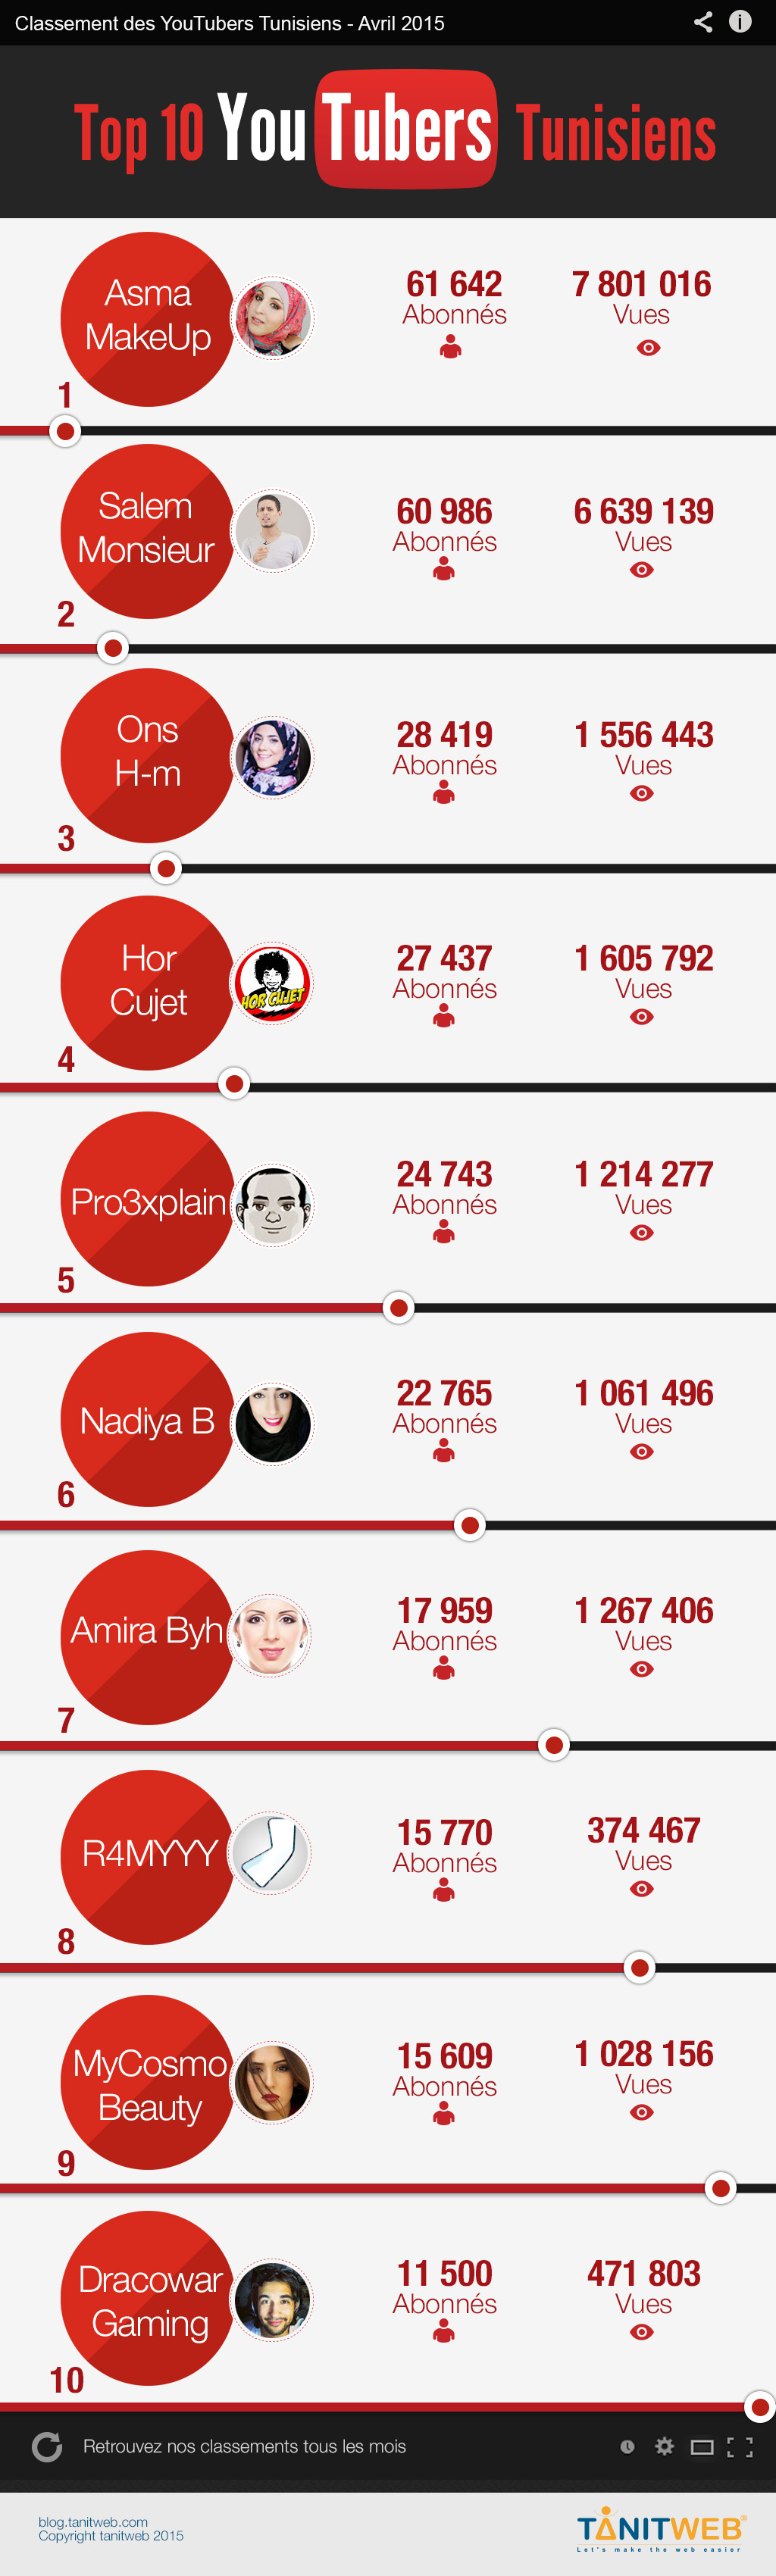 Top 10 Youtubeurs Tunisiens Avril 2015